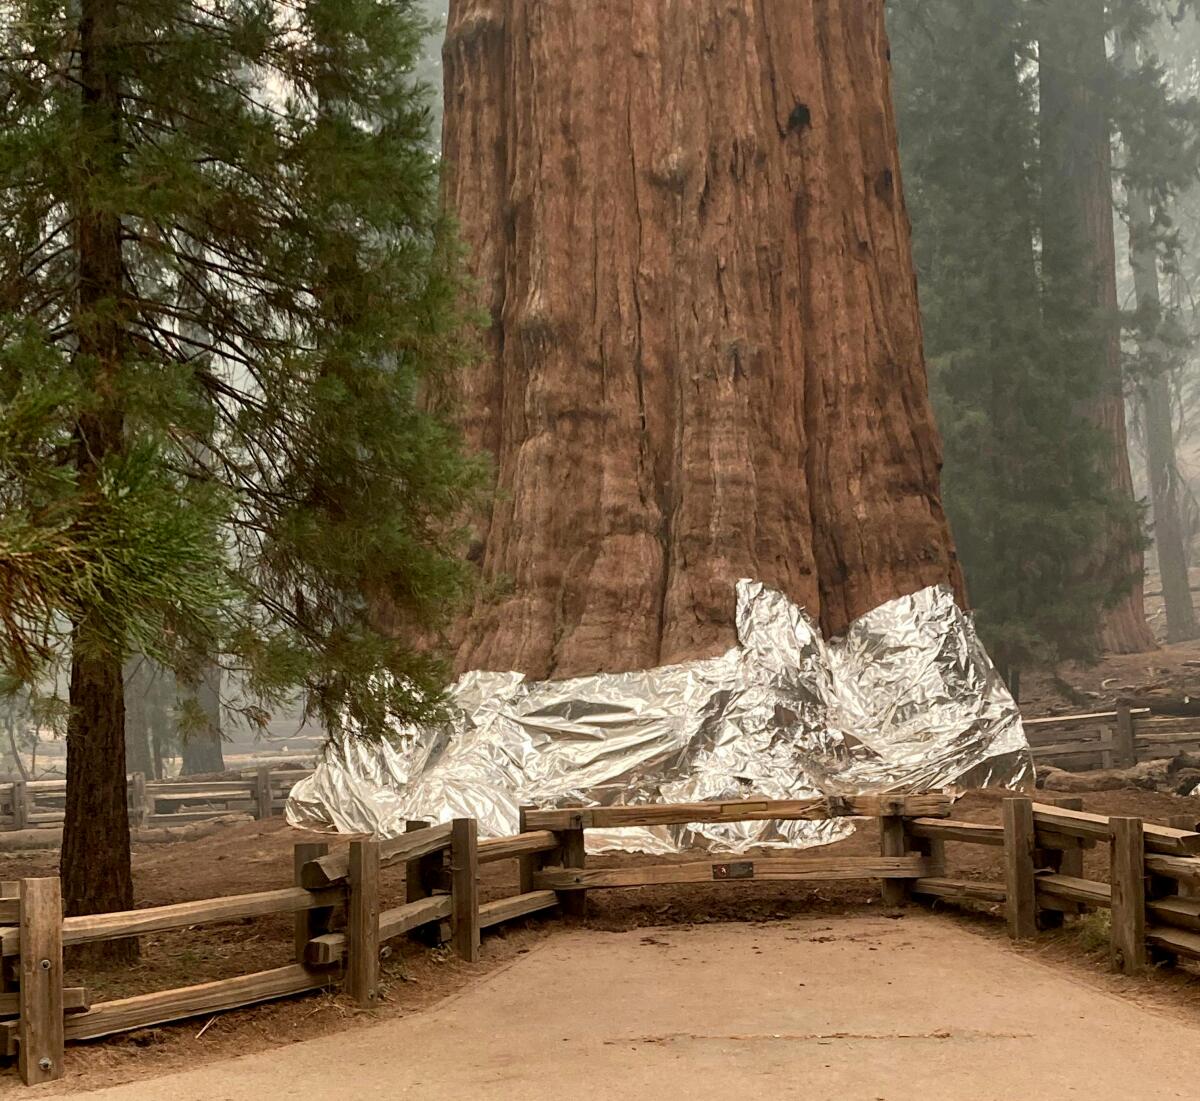 The General Sherman tree has its base wrapped in shiny silver fire-resistant material to protect it from a nearby wildfire.